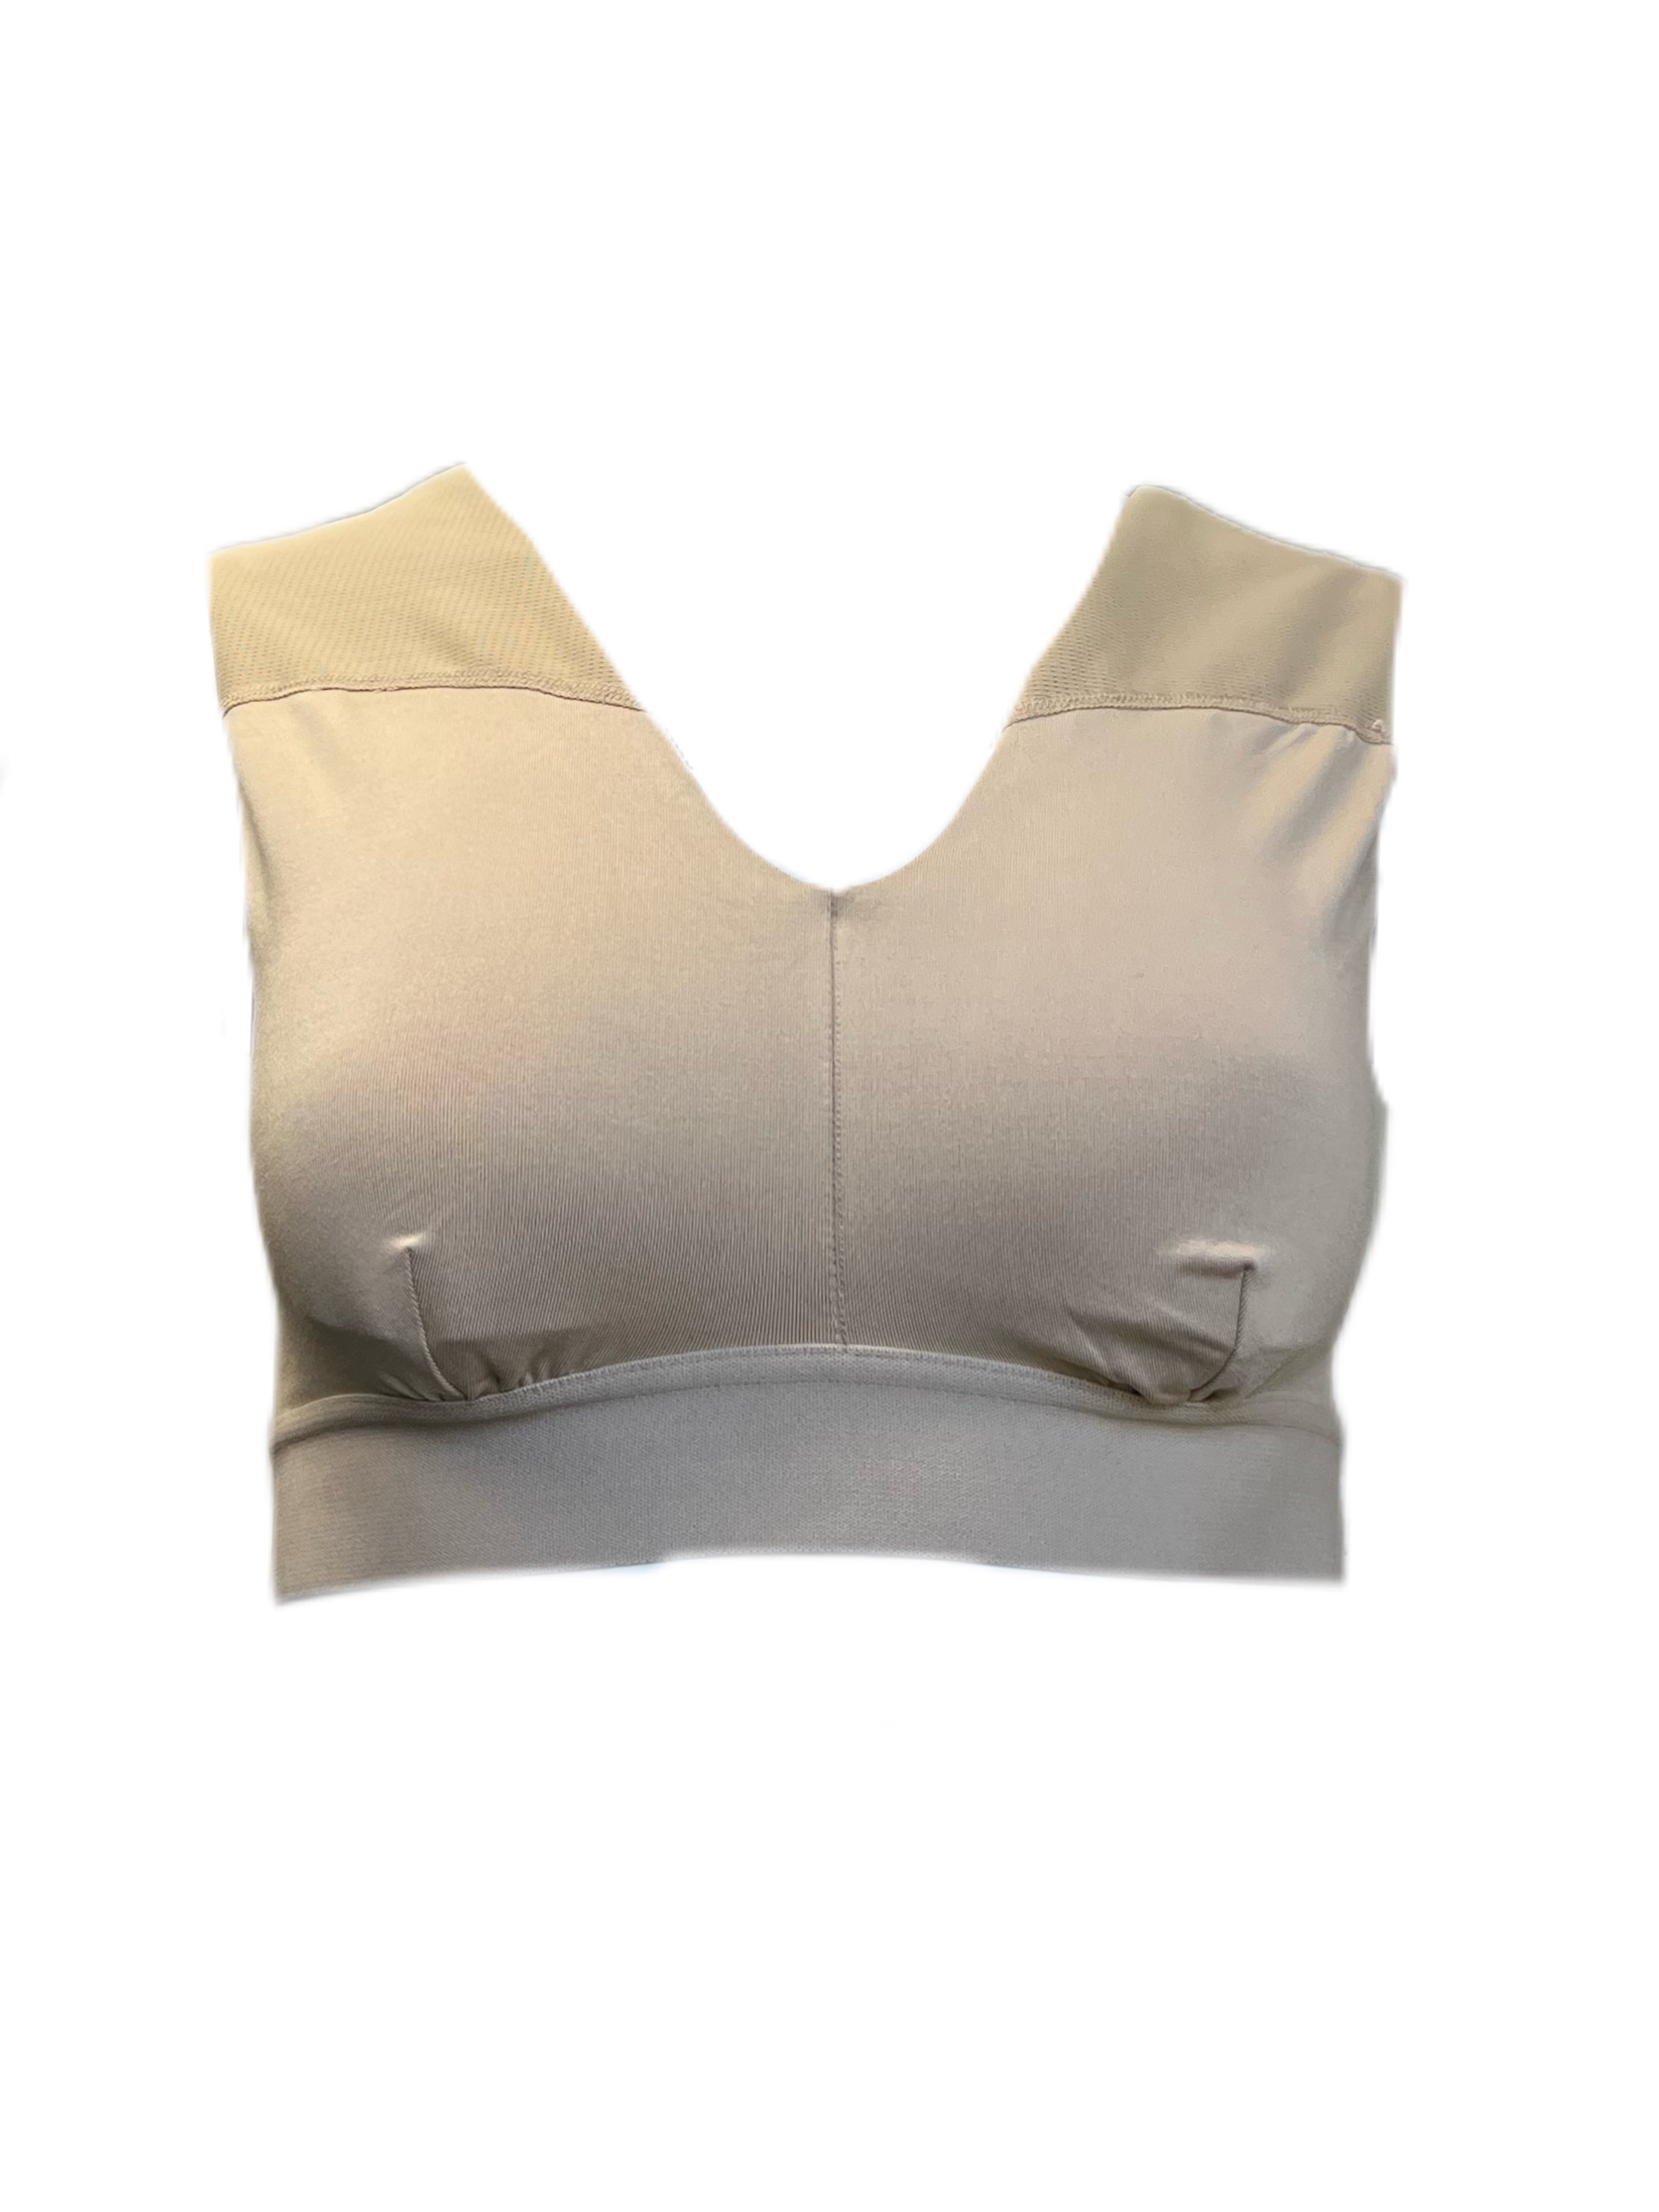 TOMMIE COPPER Womens White Shoulder Support Comfort Bra, XX-Large